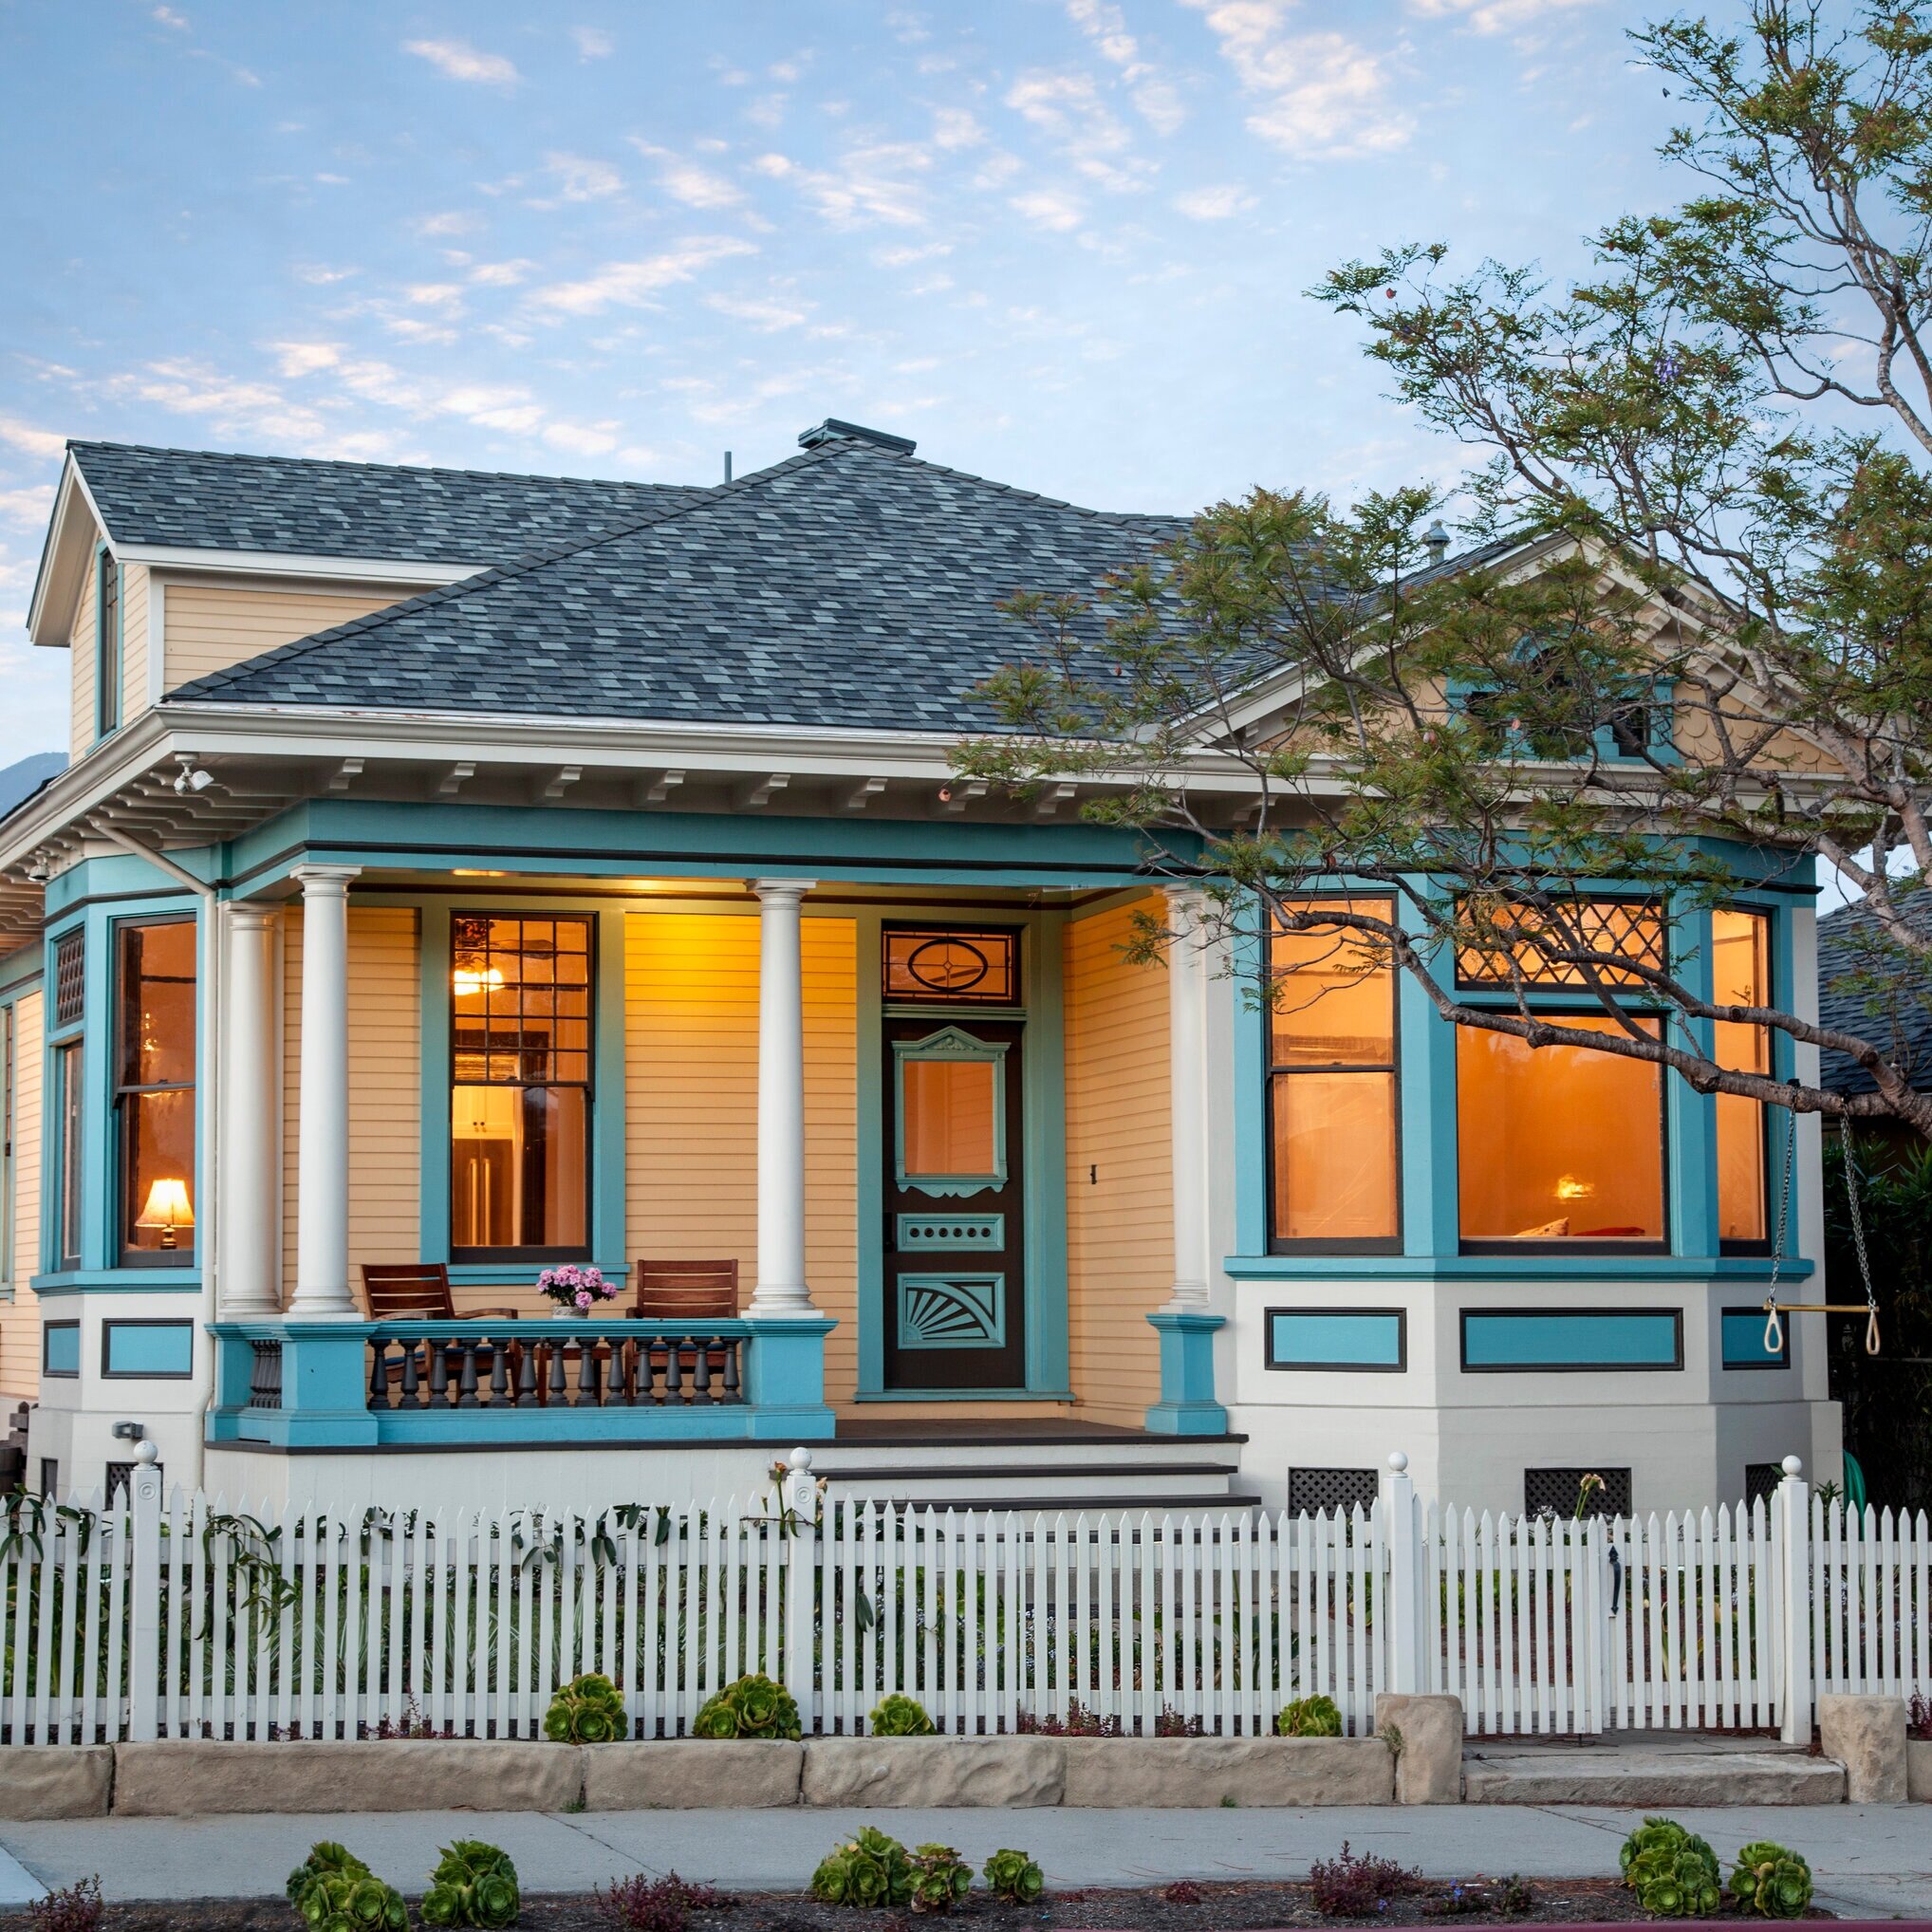 QUEEN ANNE STYLE HOME